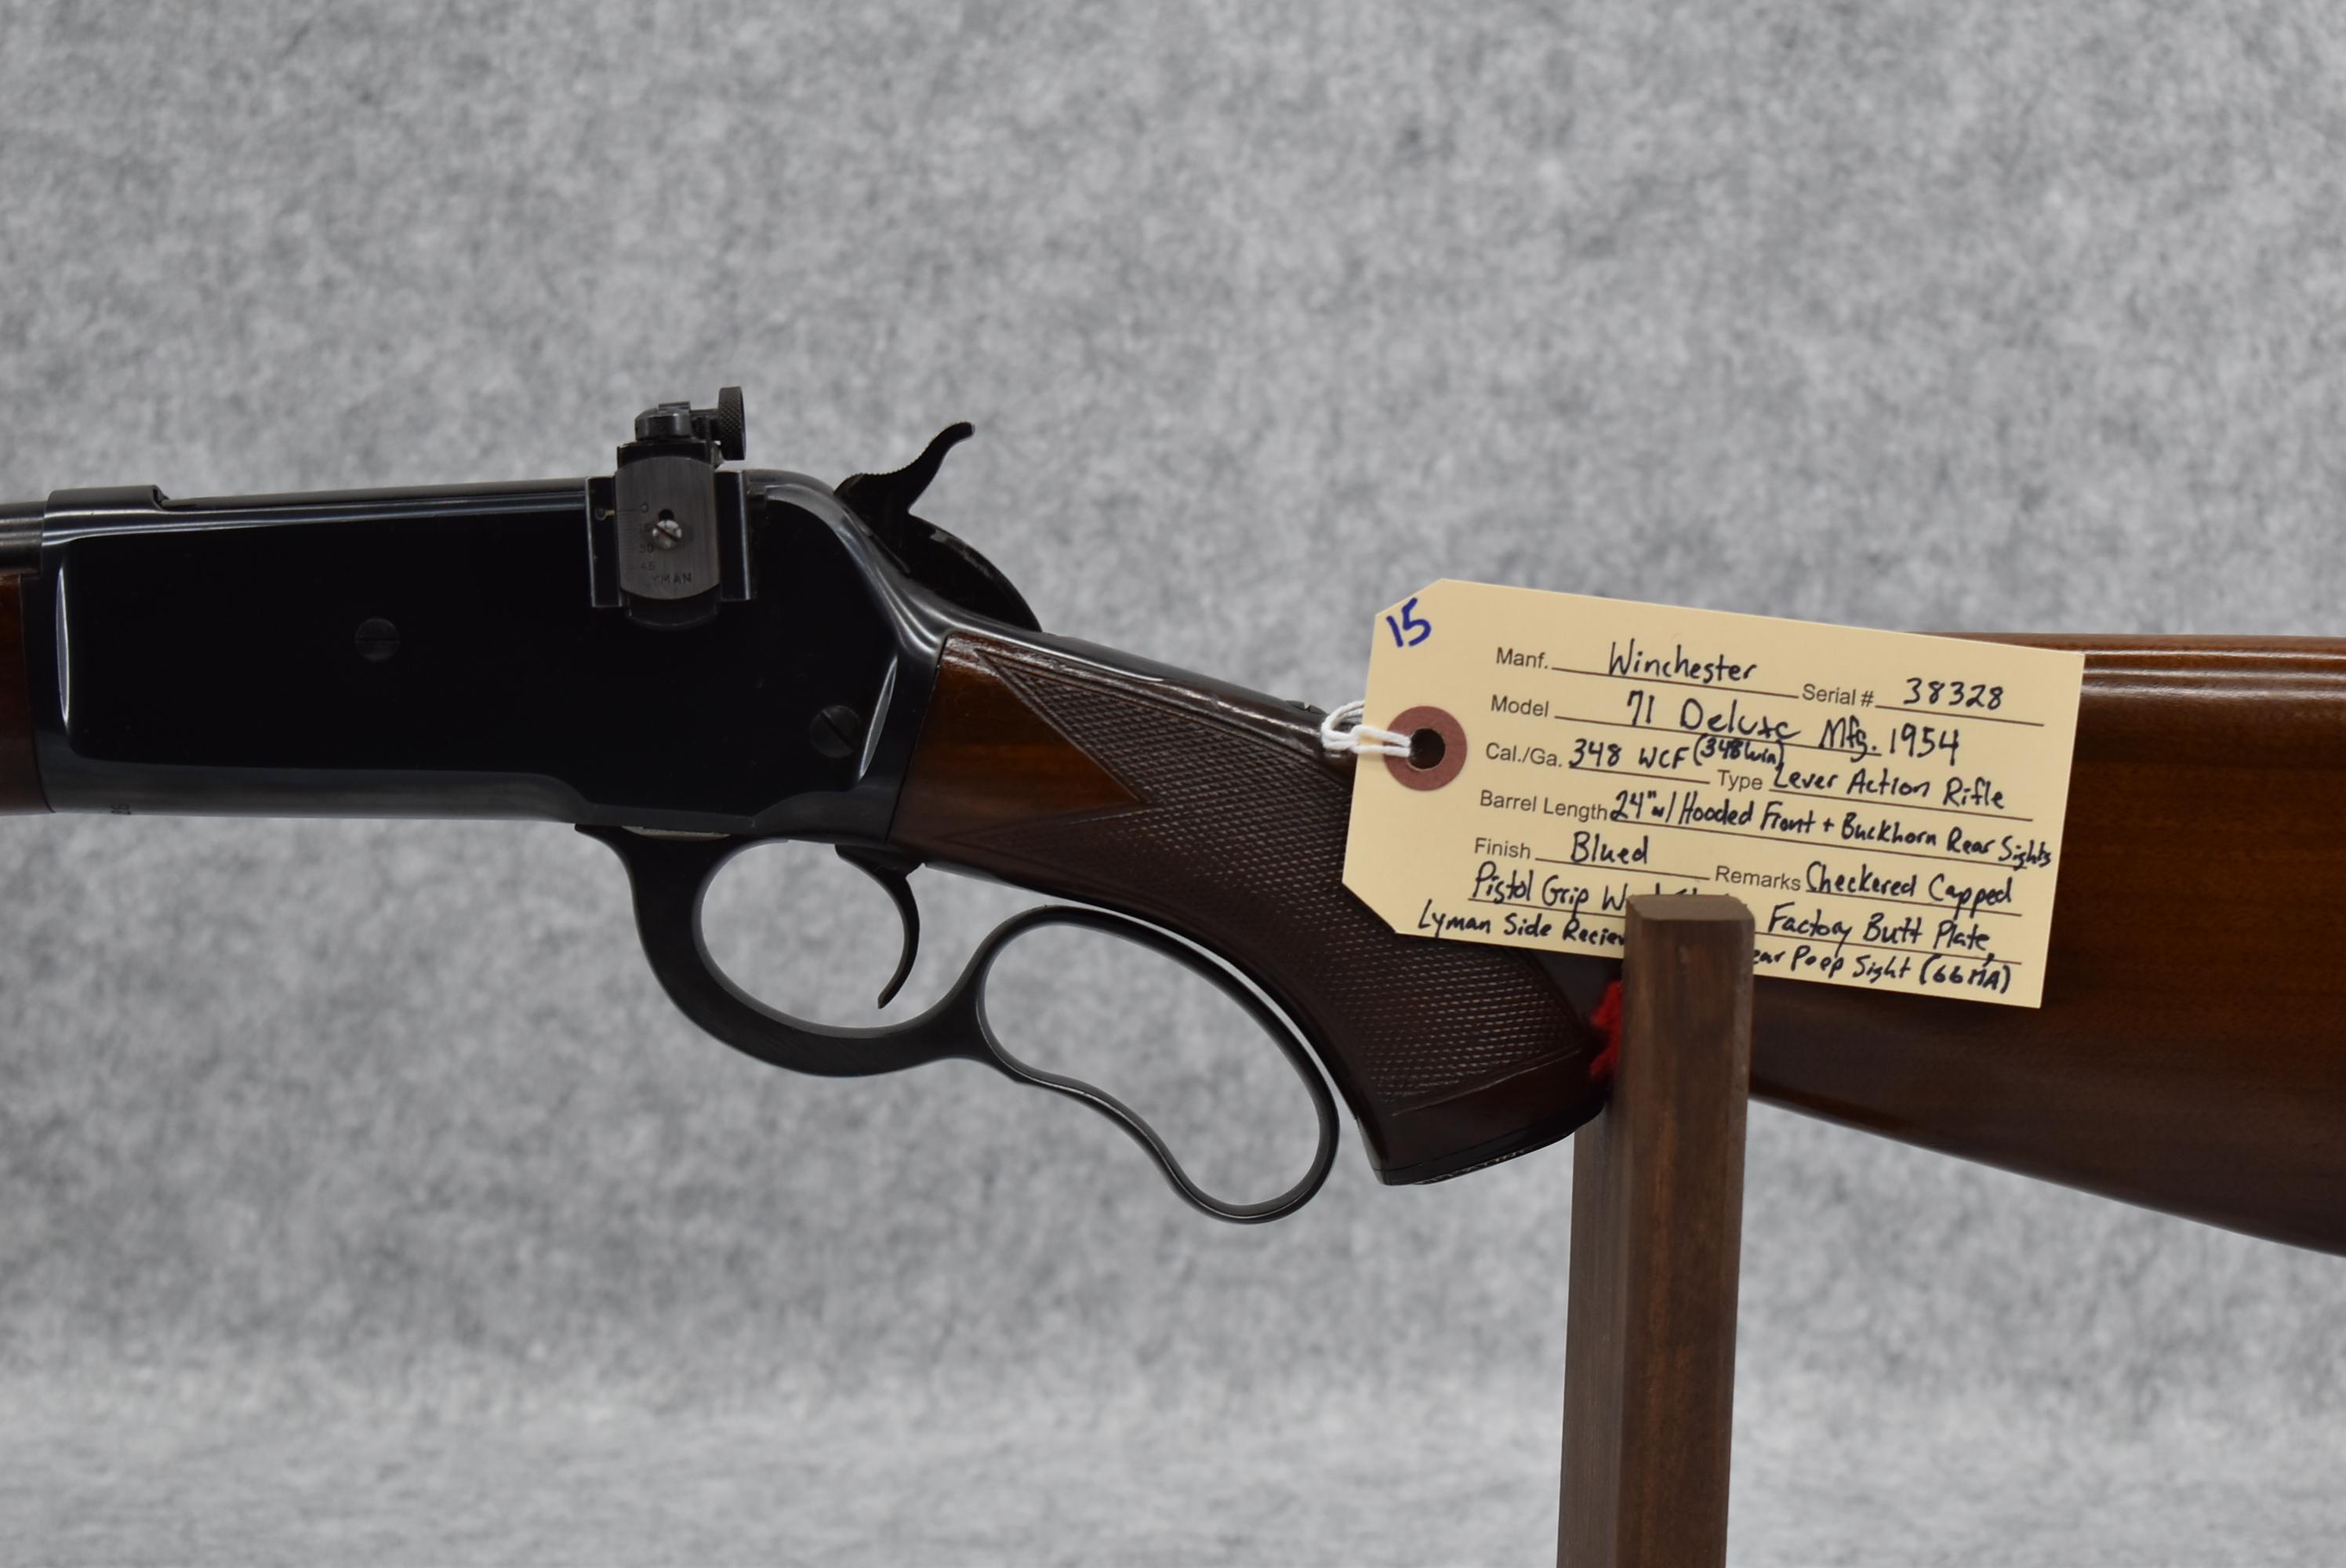 Winchester – Mod. 71 Deluxe 348 WCF (348 Win.) Cal. Lever Action Rifle